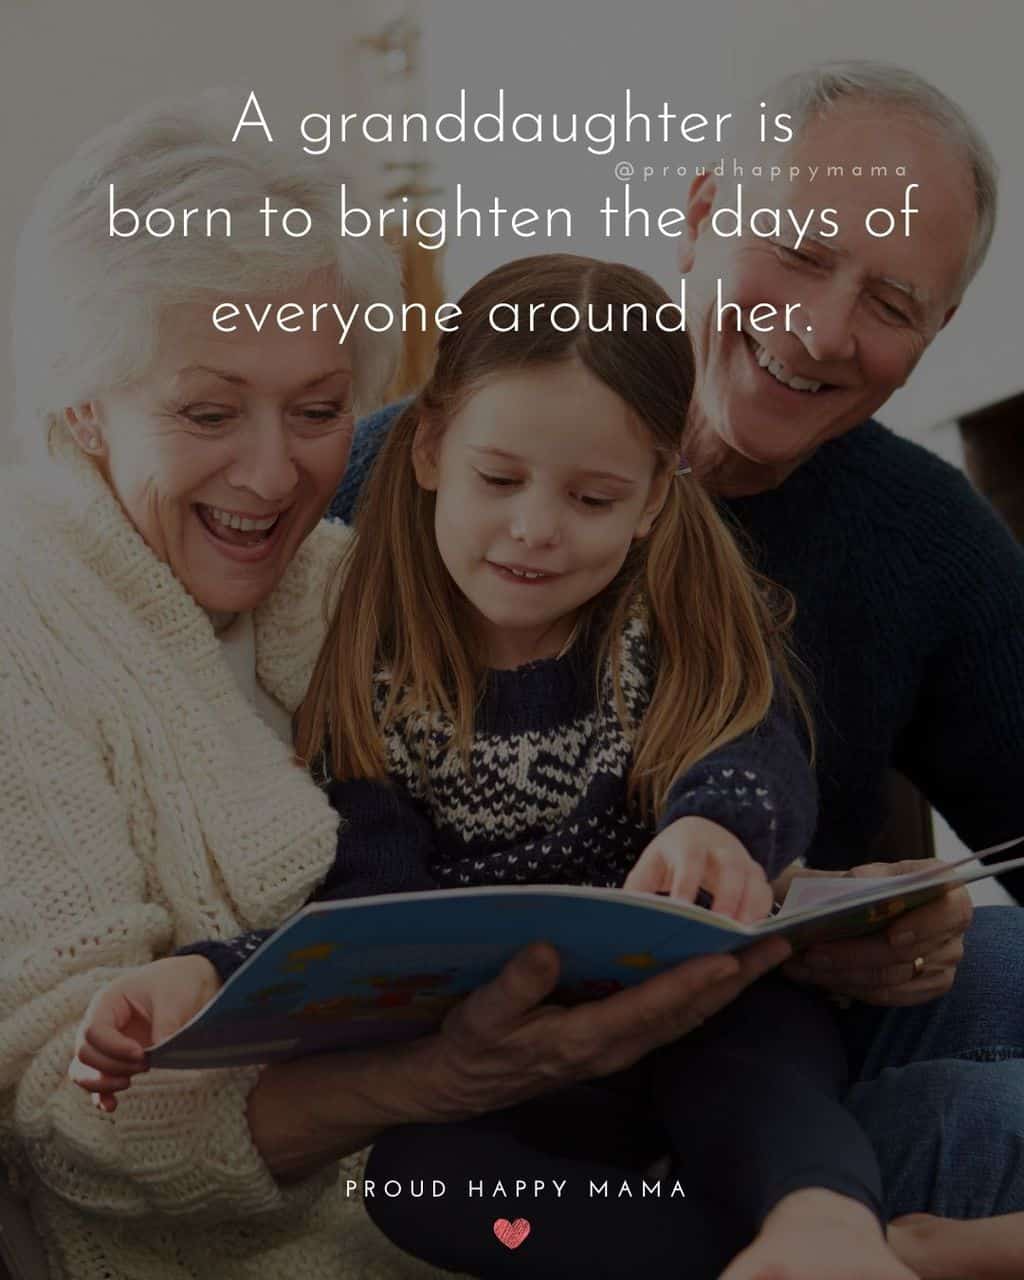 Granddaughter Quotes - A granddaughter is born to brighten the days of everyone around her.